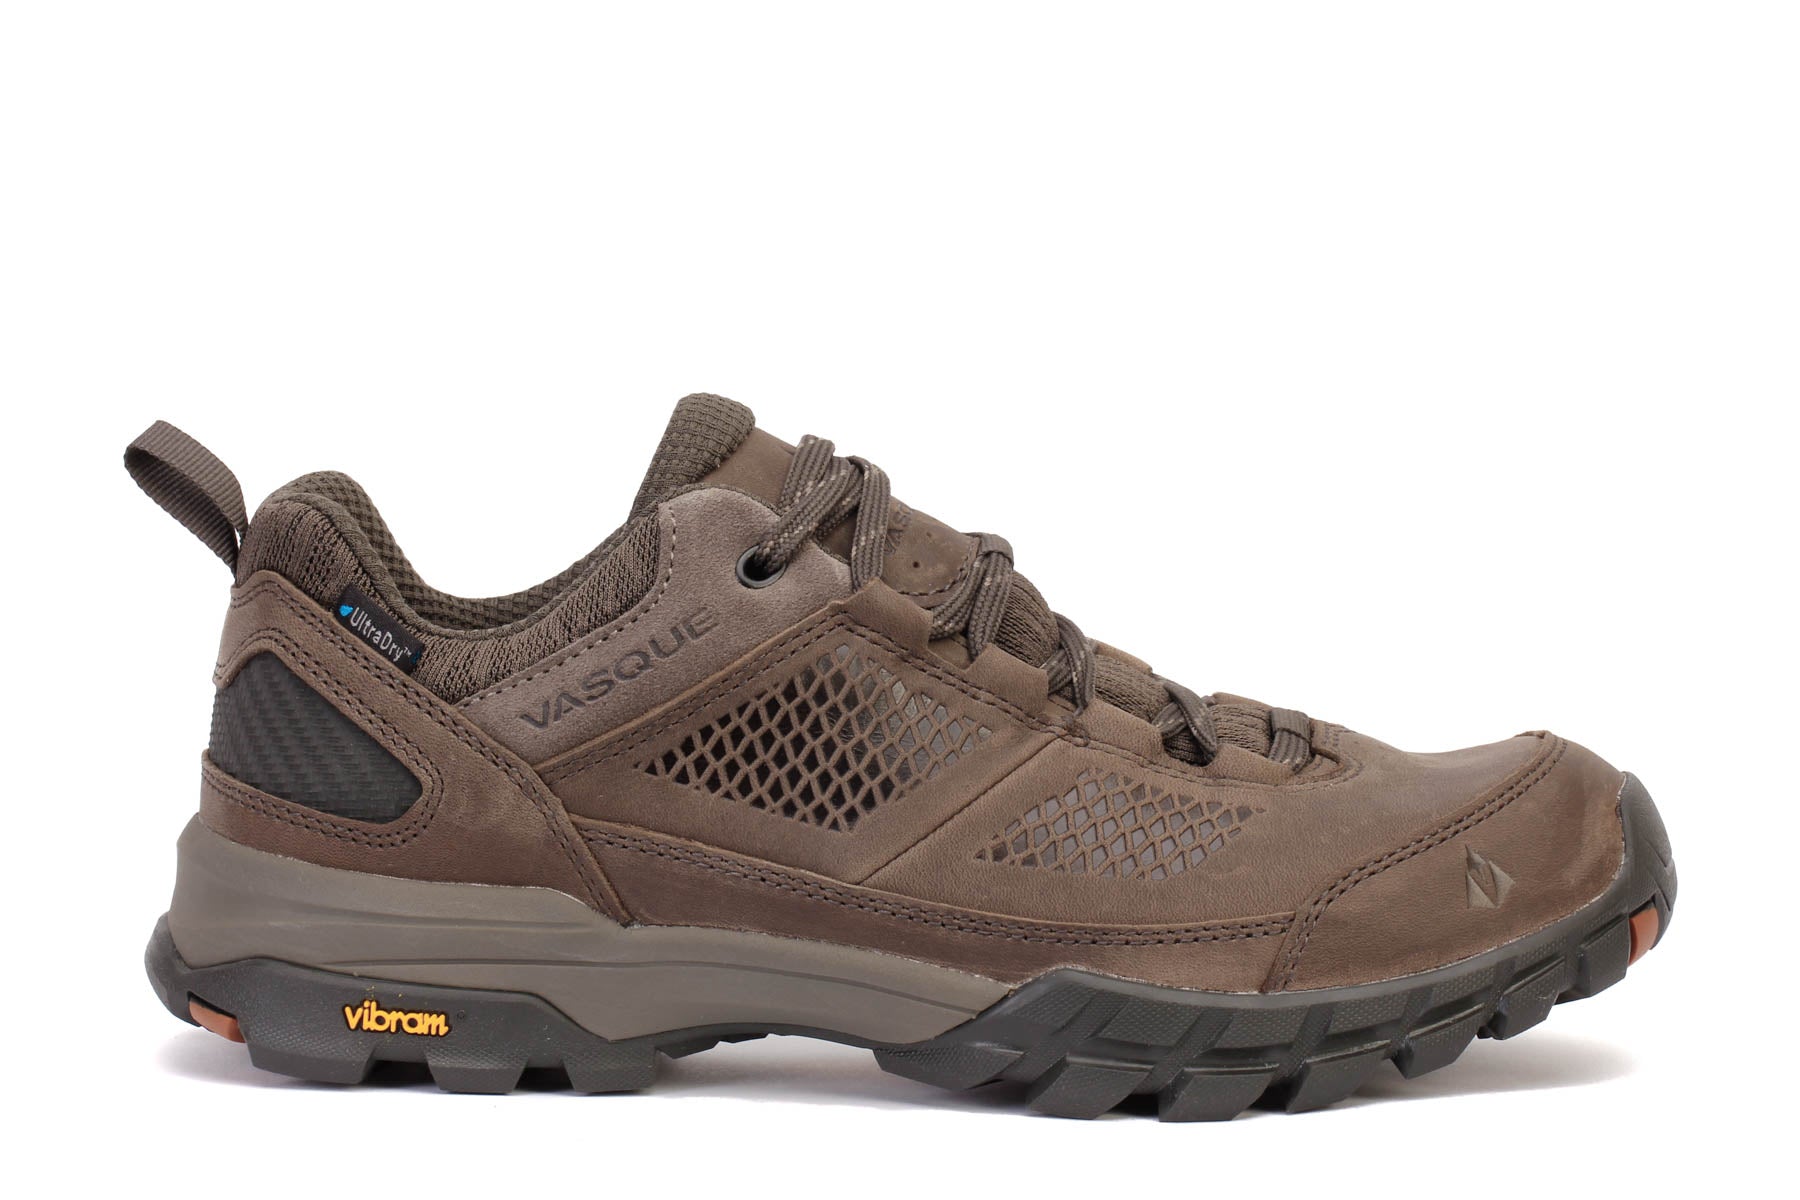 Talus AT Low Waterproof shoes